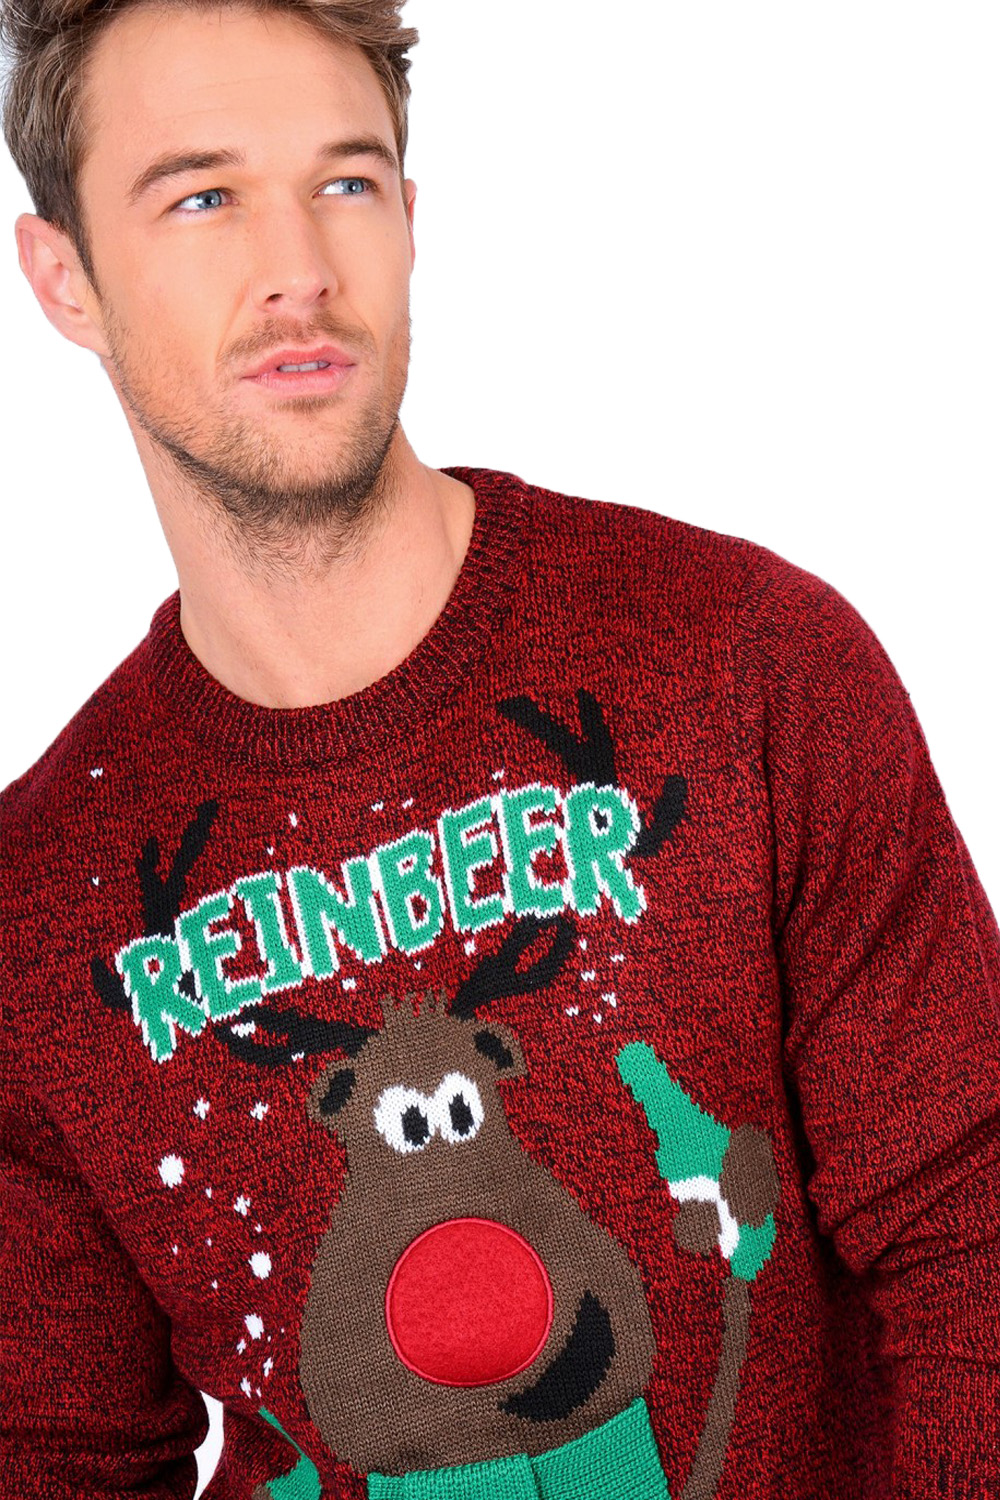 Adults Unisex Novelty Knitted Christmas Jumper New Festive Vintage Sweater Top